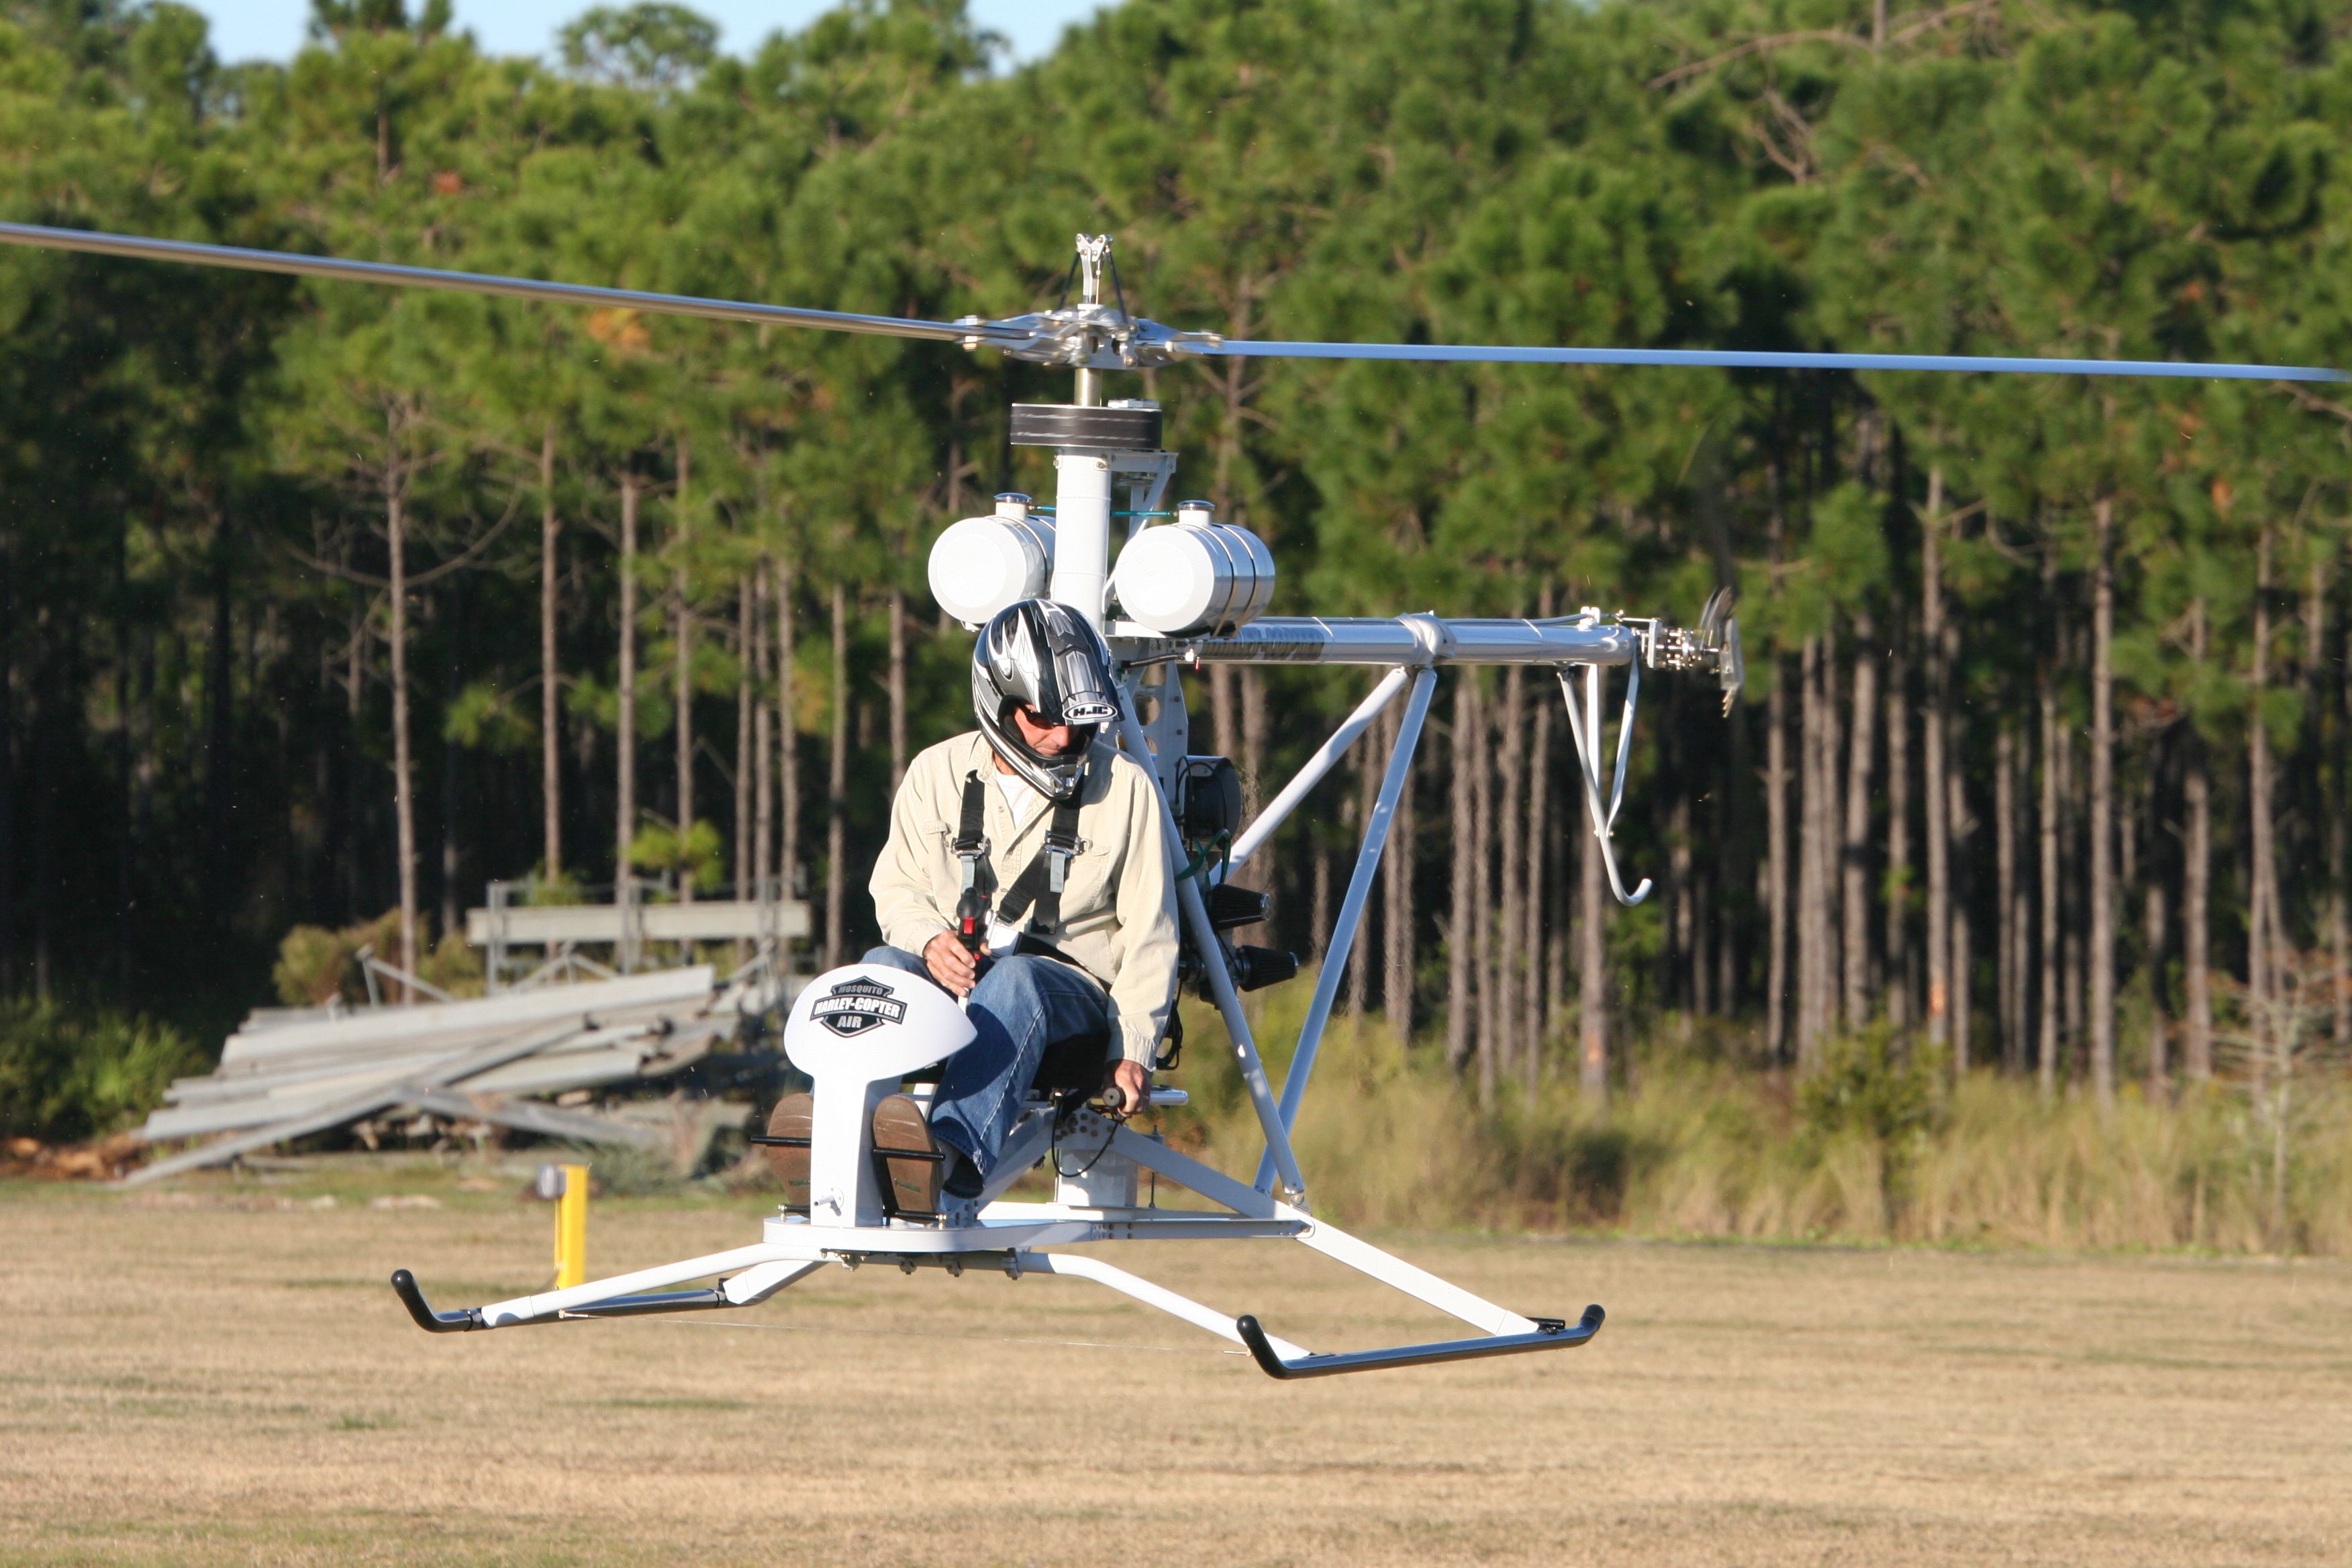 mosquito ultralight helicopter blueprint